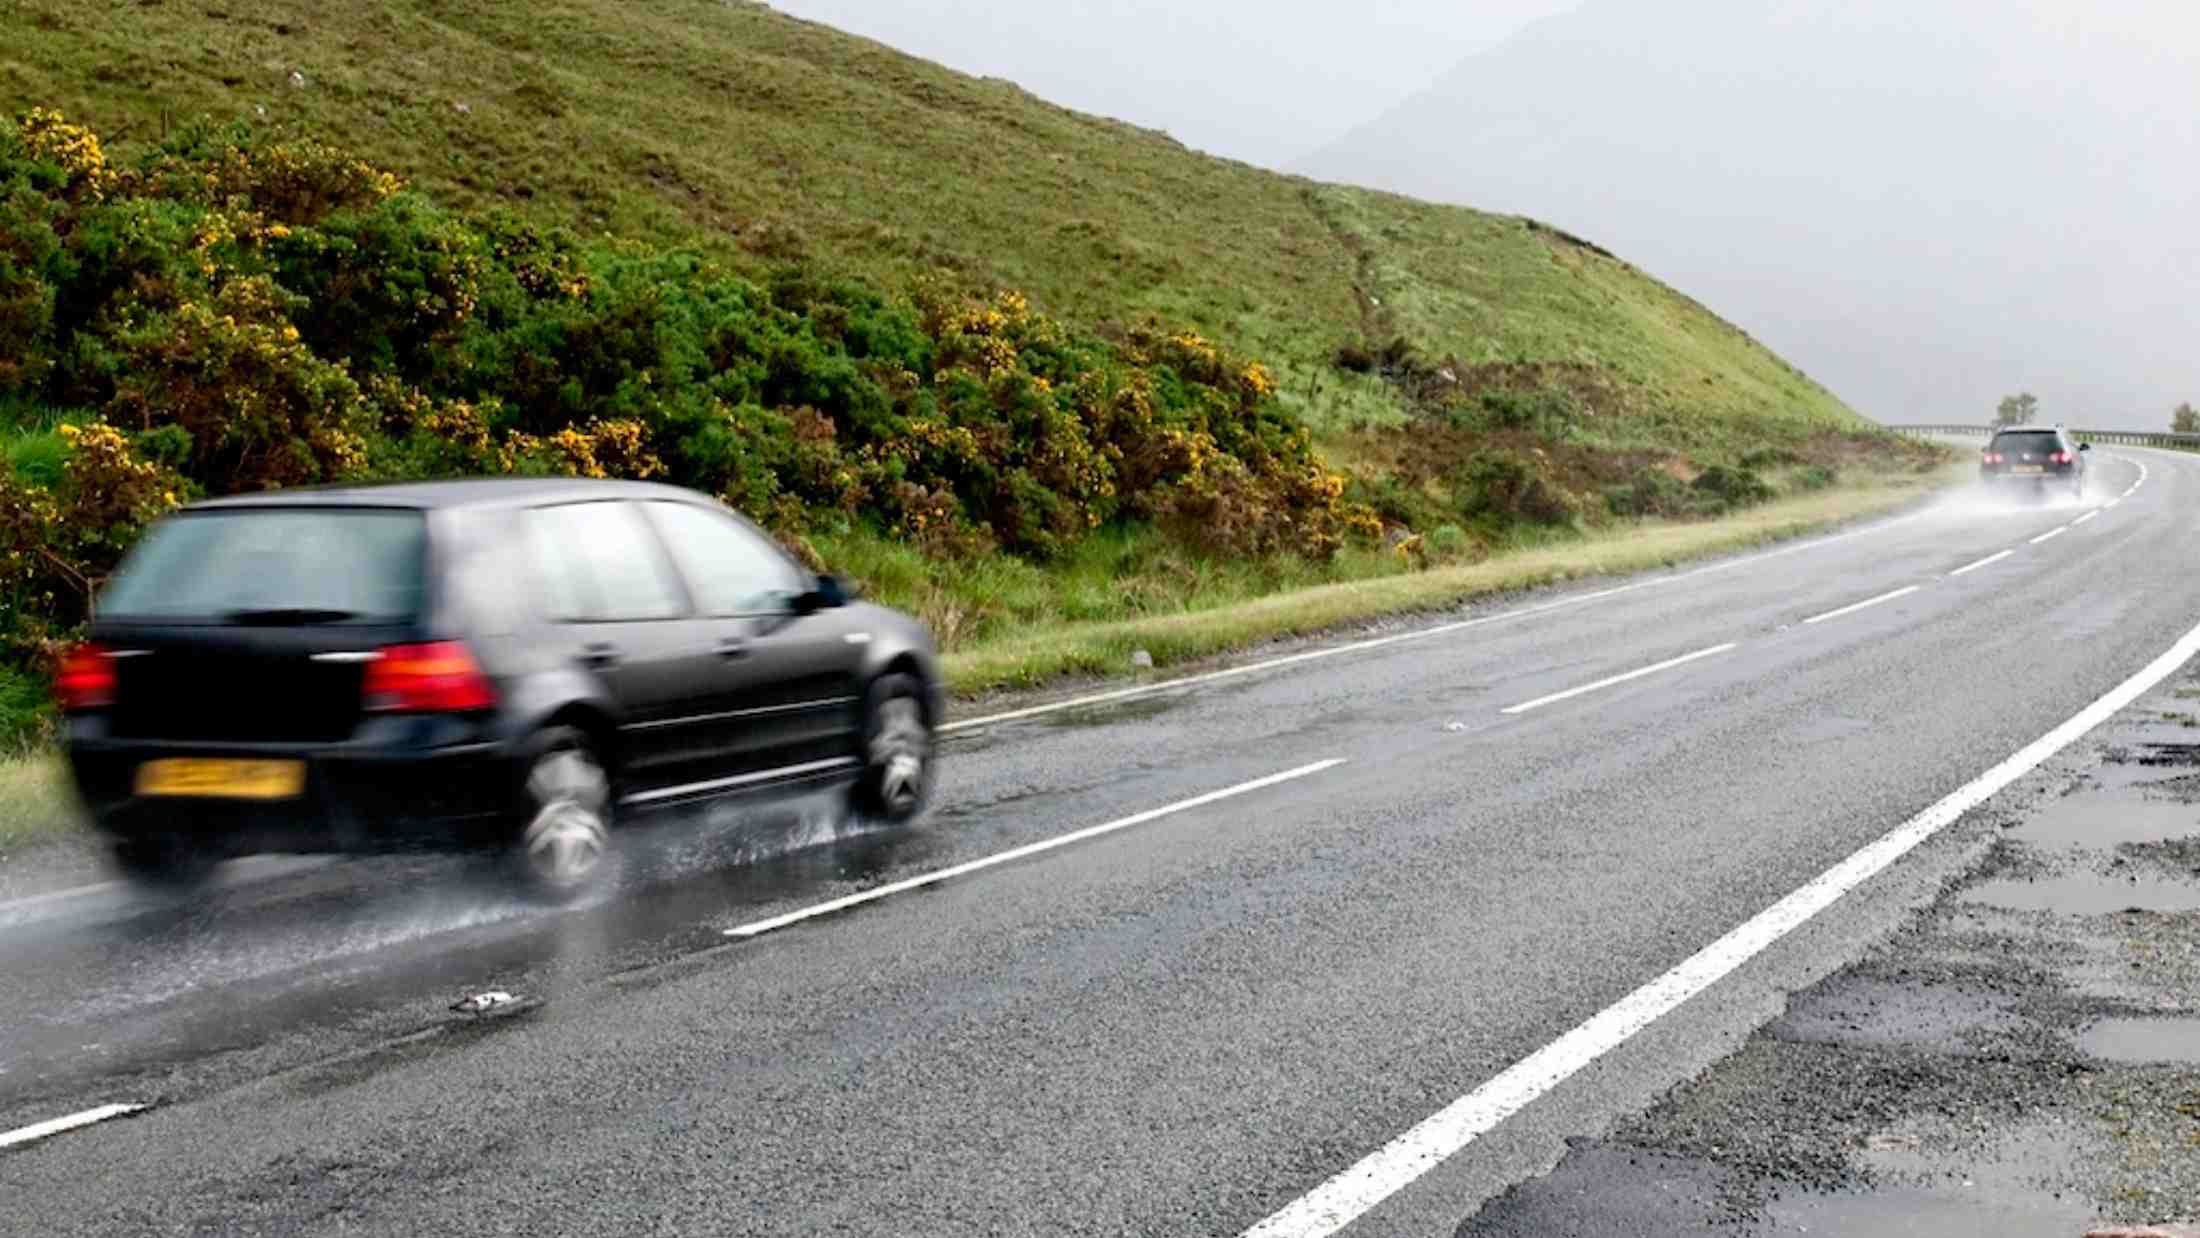 Two cars speed along a winding wet country road in Scotland